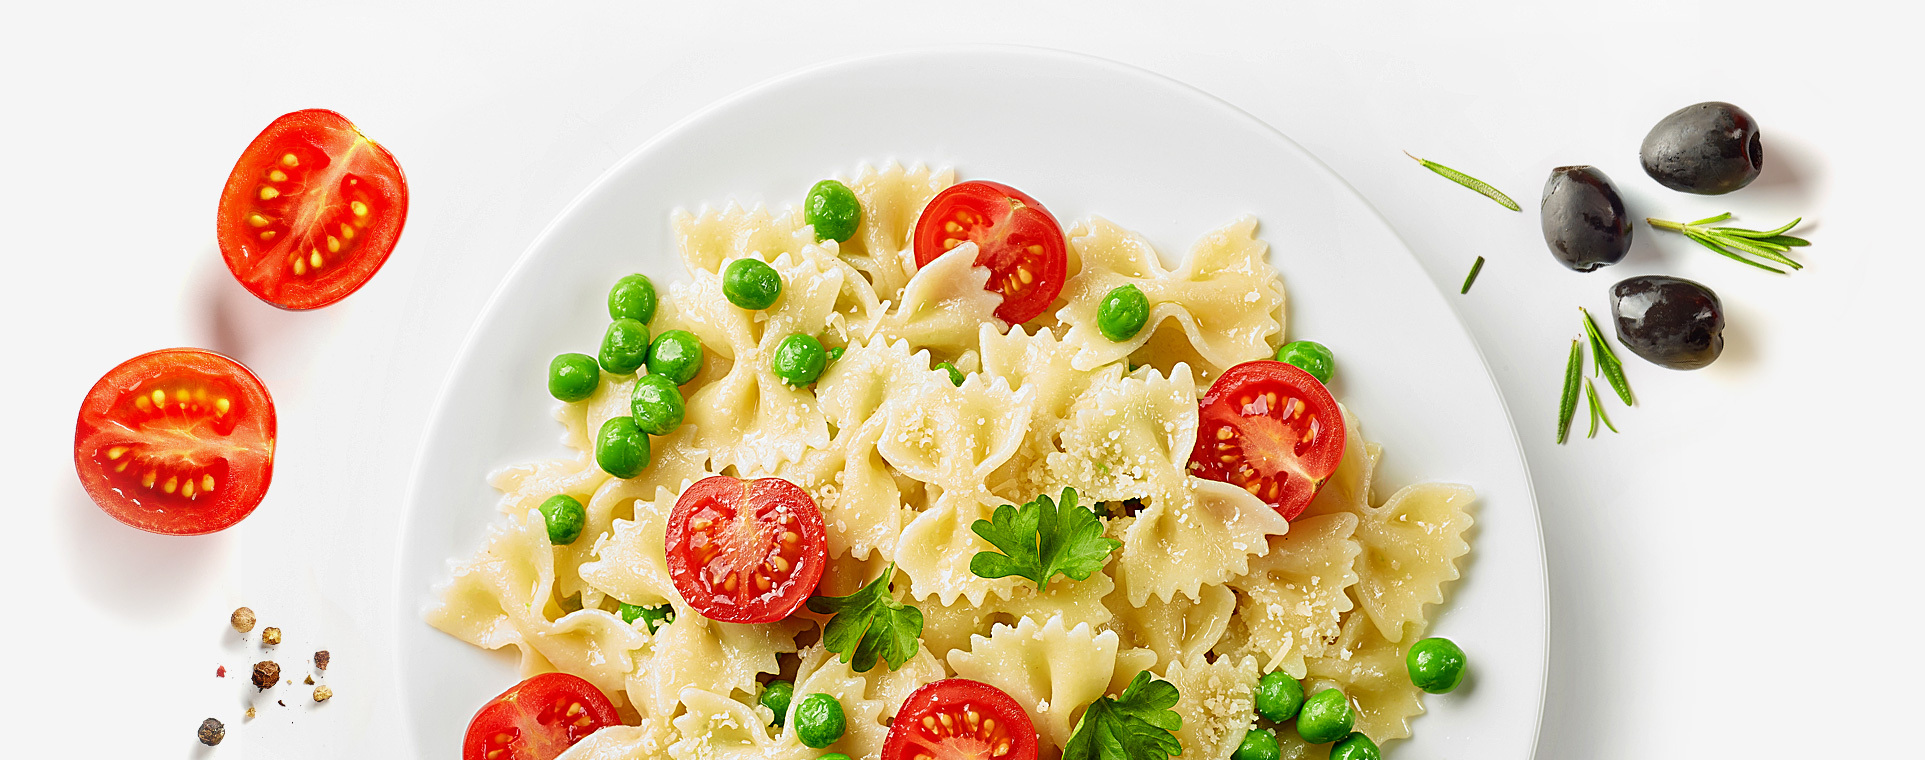 Plate - pasta with tomatoes and peas.